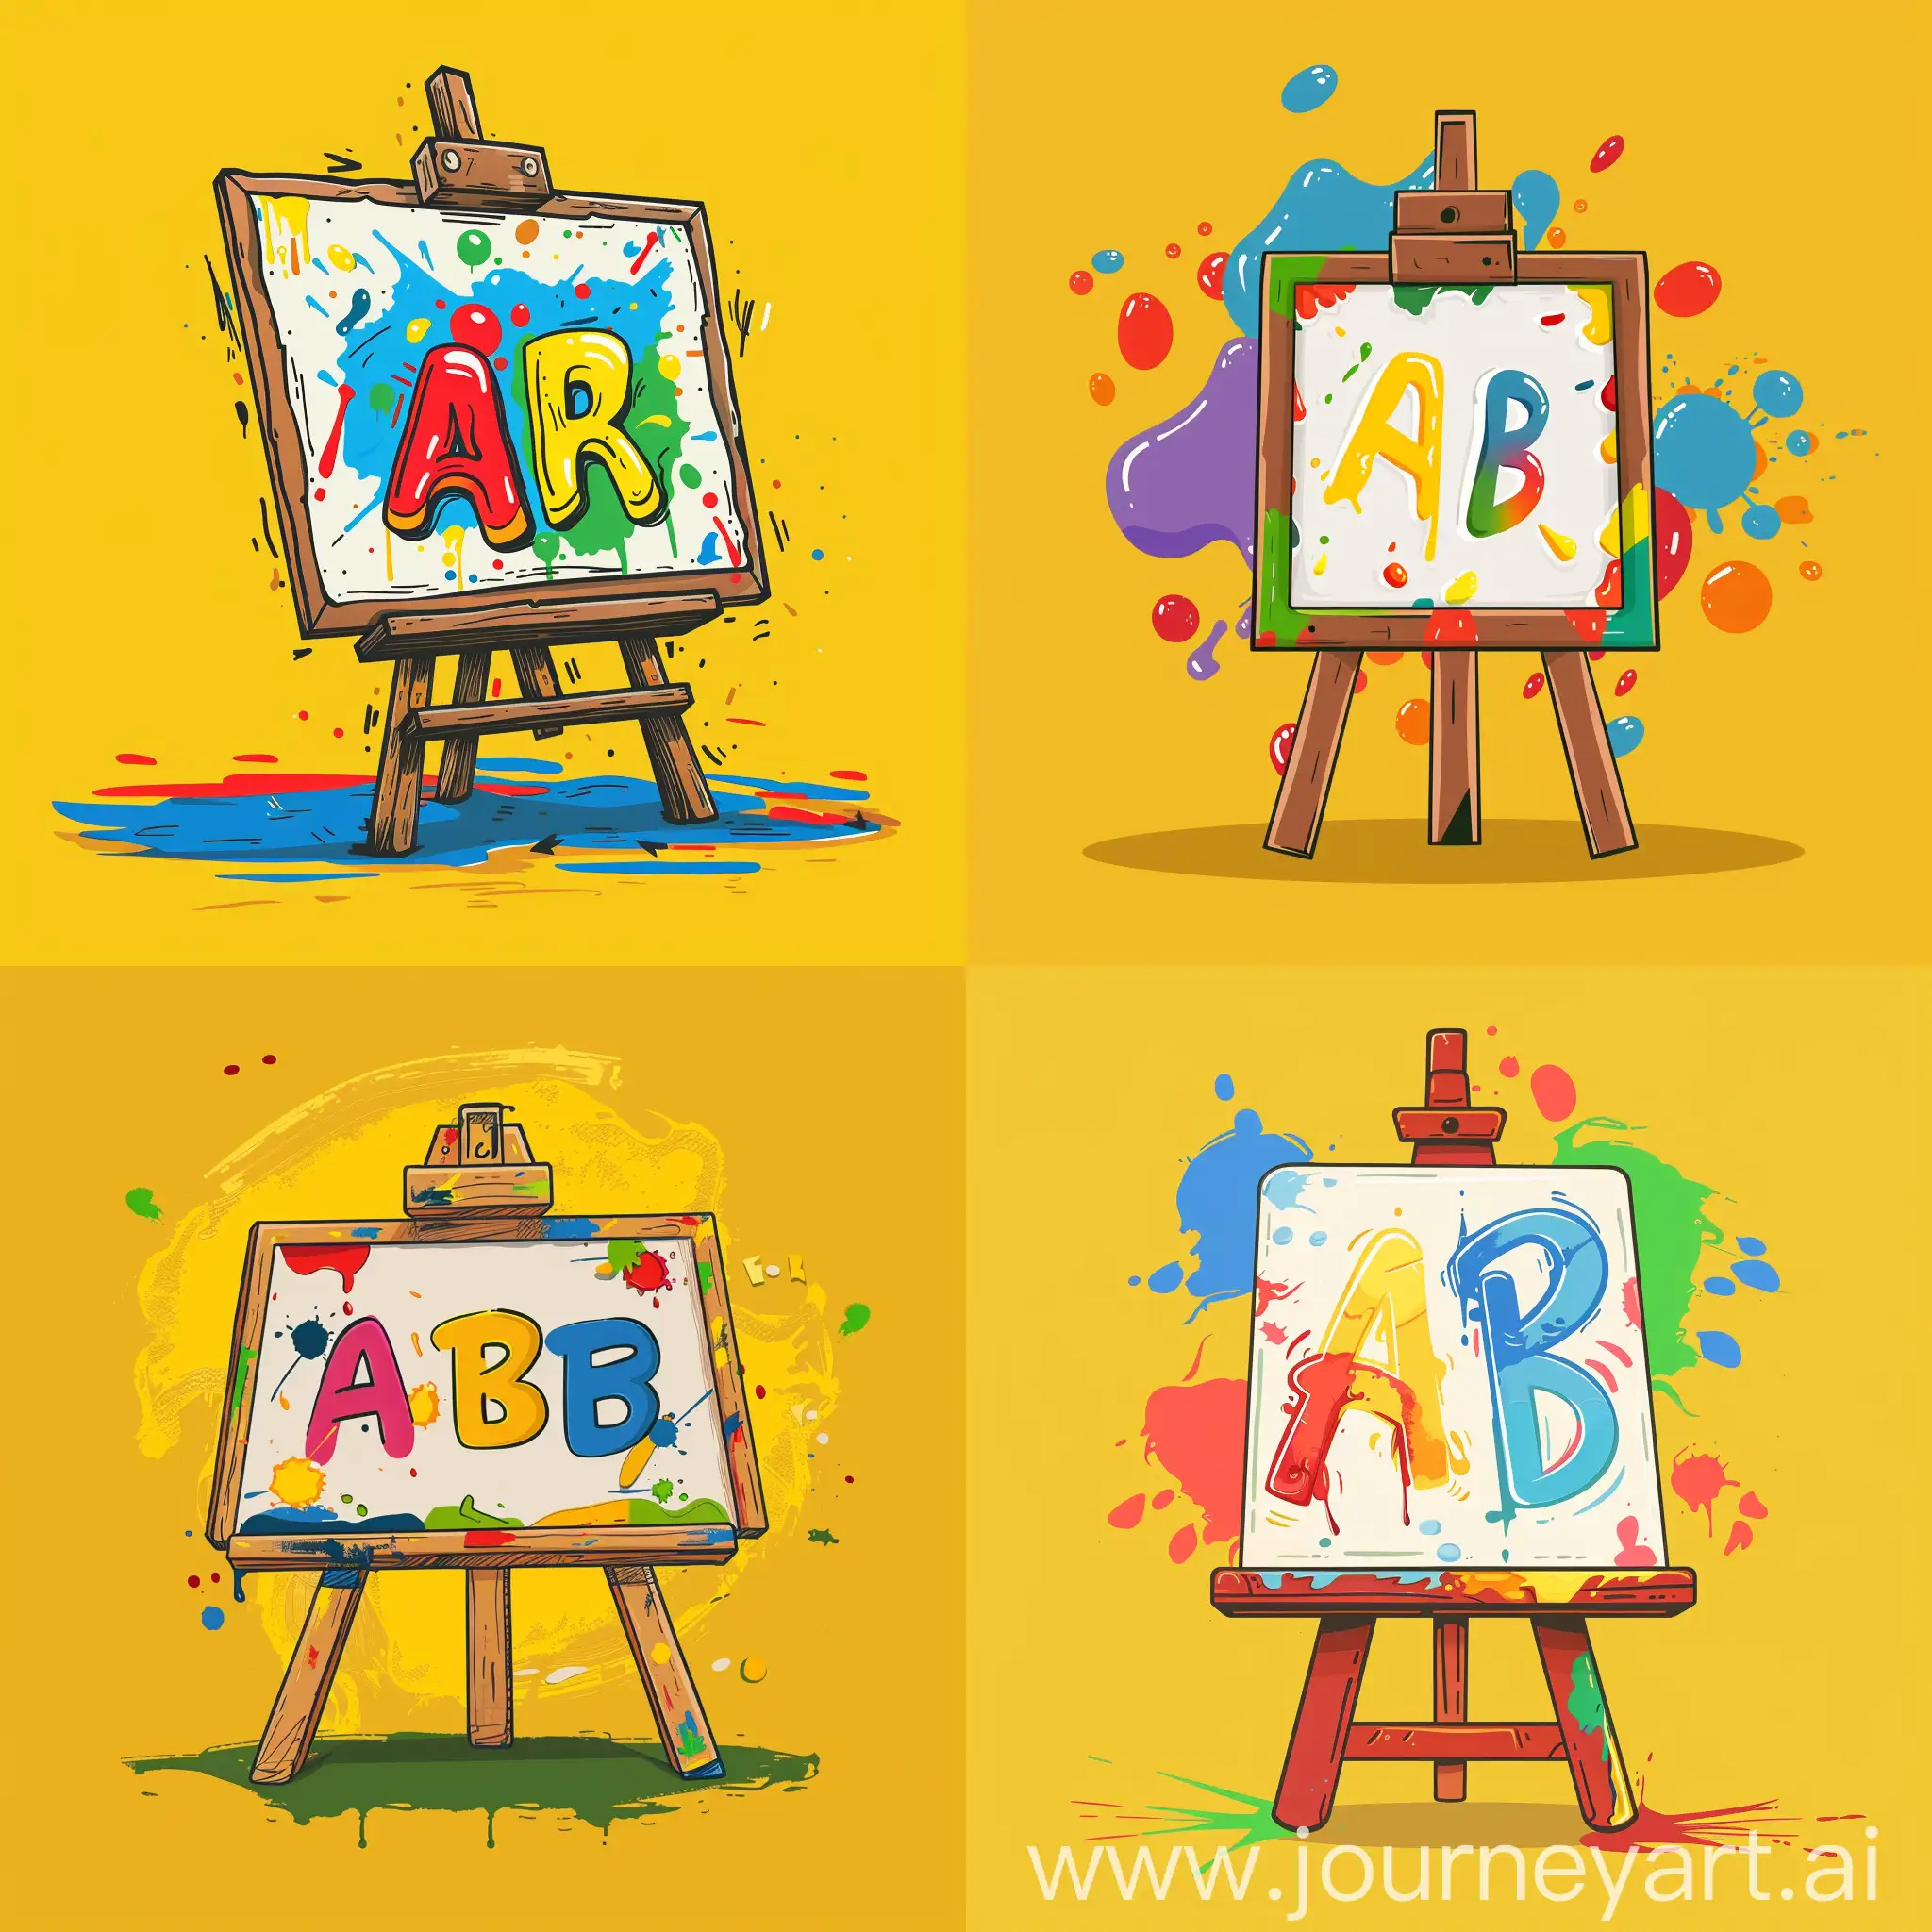 An easel on a yellow background. There is a canvas on the easel. There are paint stains on the canvas around the edges. Three letters "A", "B", "R", of different colors are painted in the middle of the canvas. Cartoon style, logo style